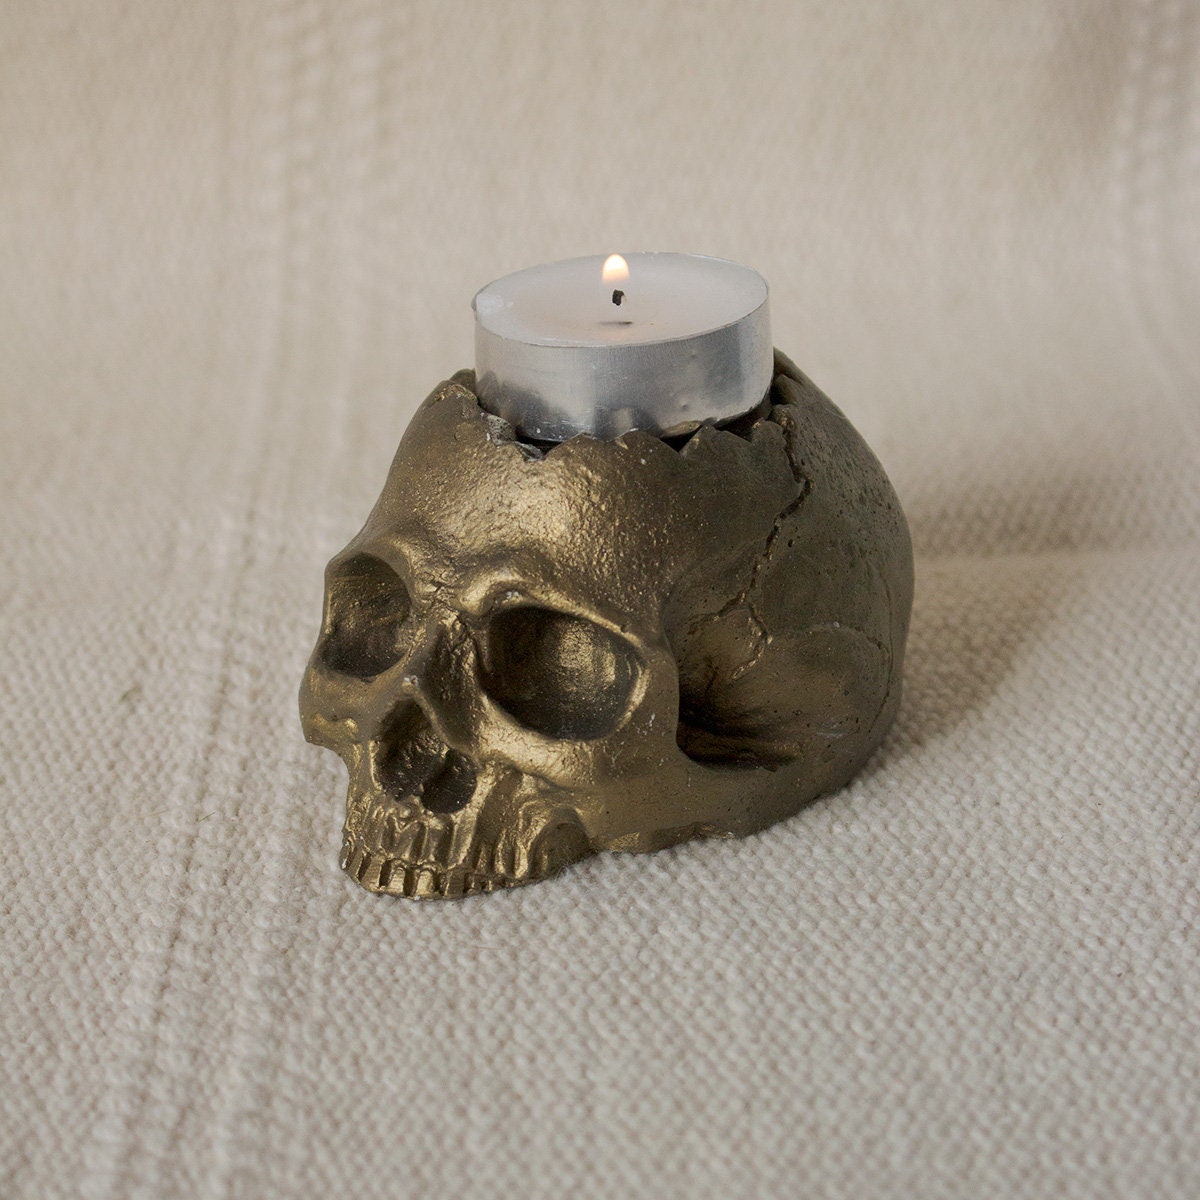 Beaded Skull Candle